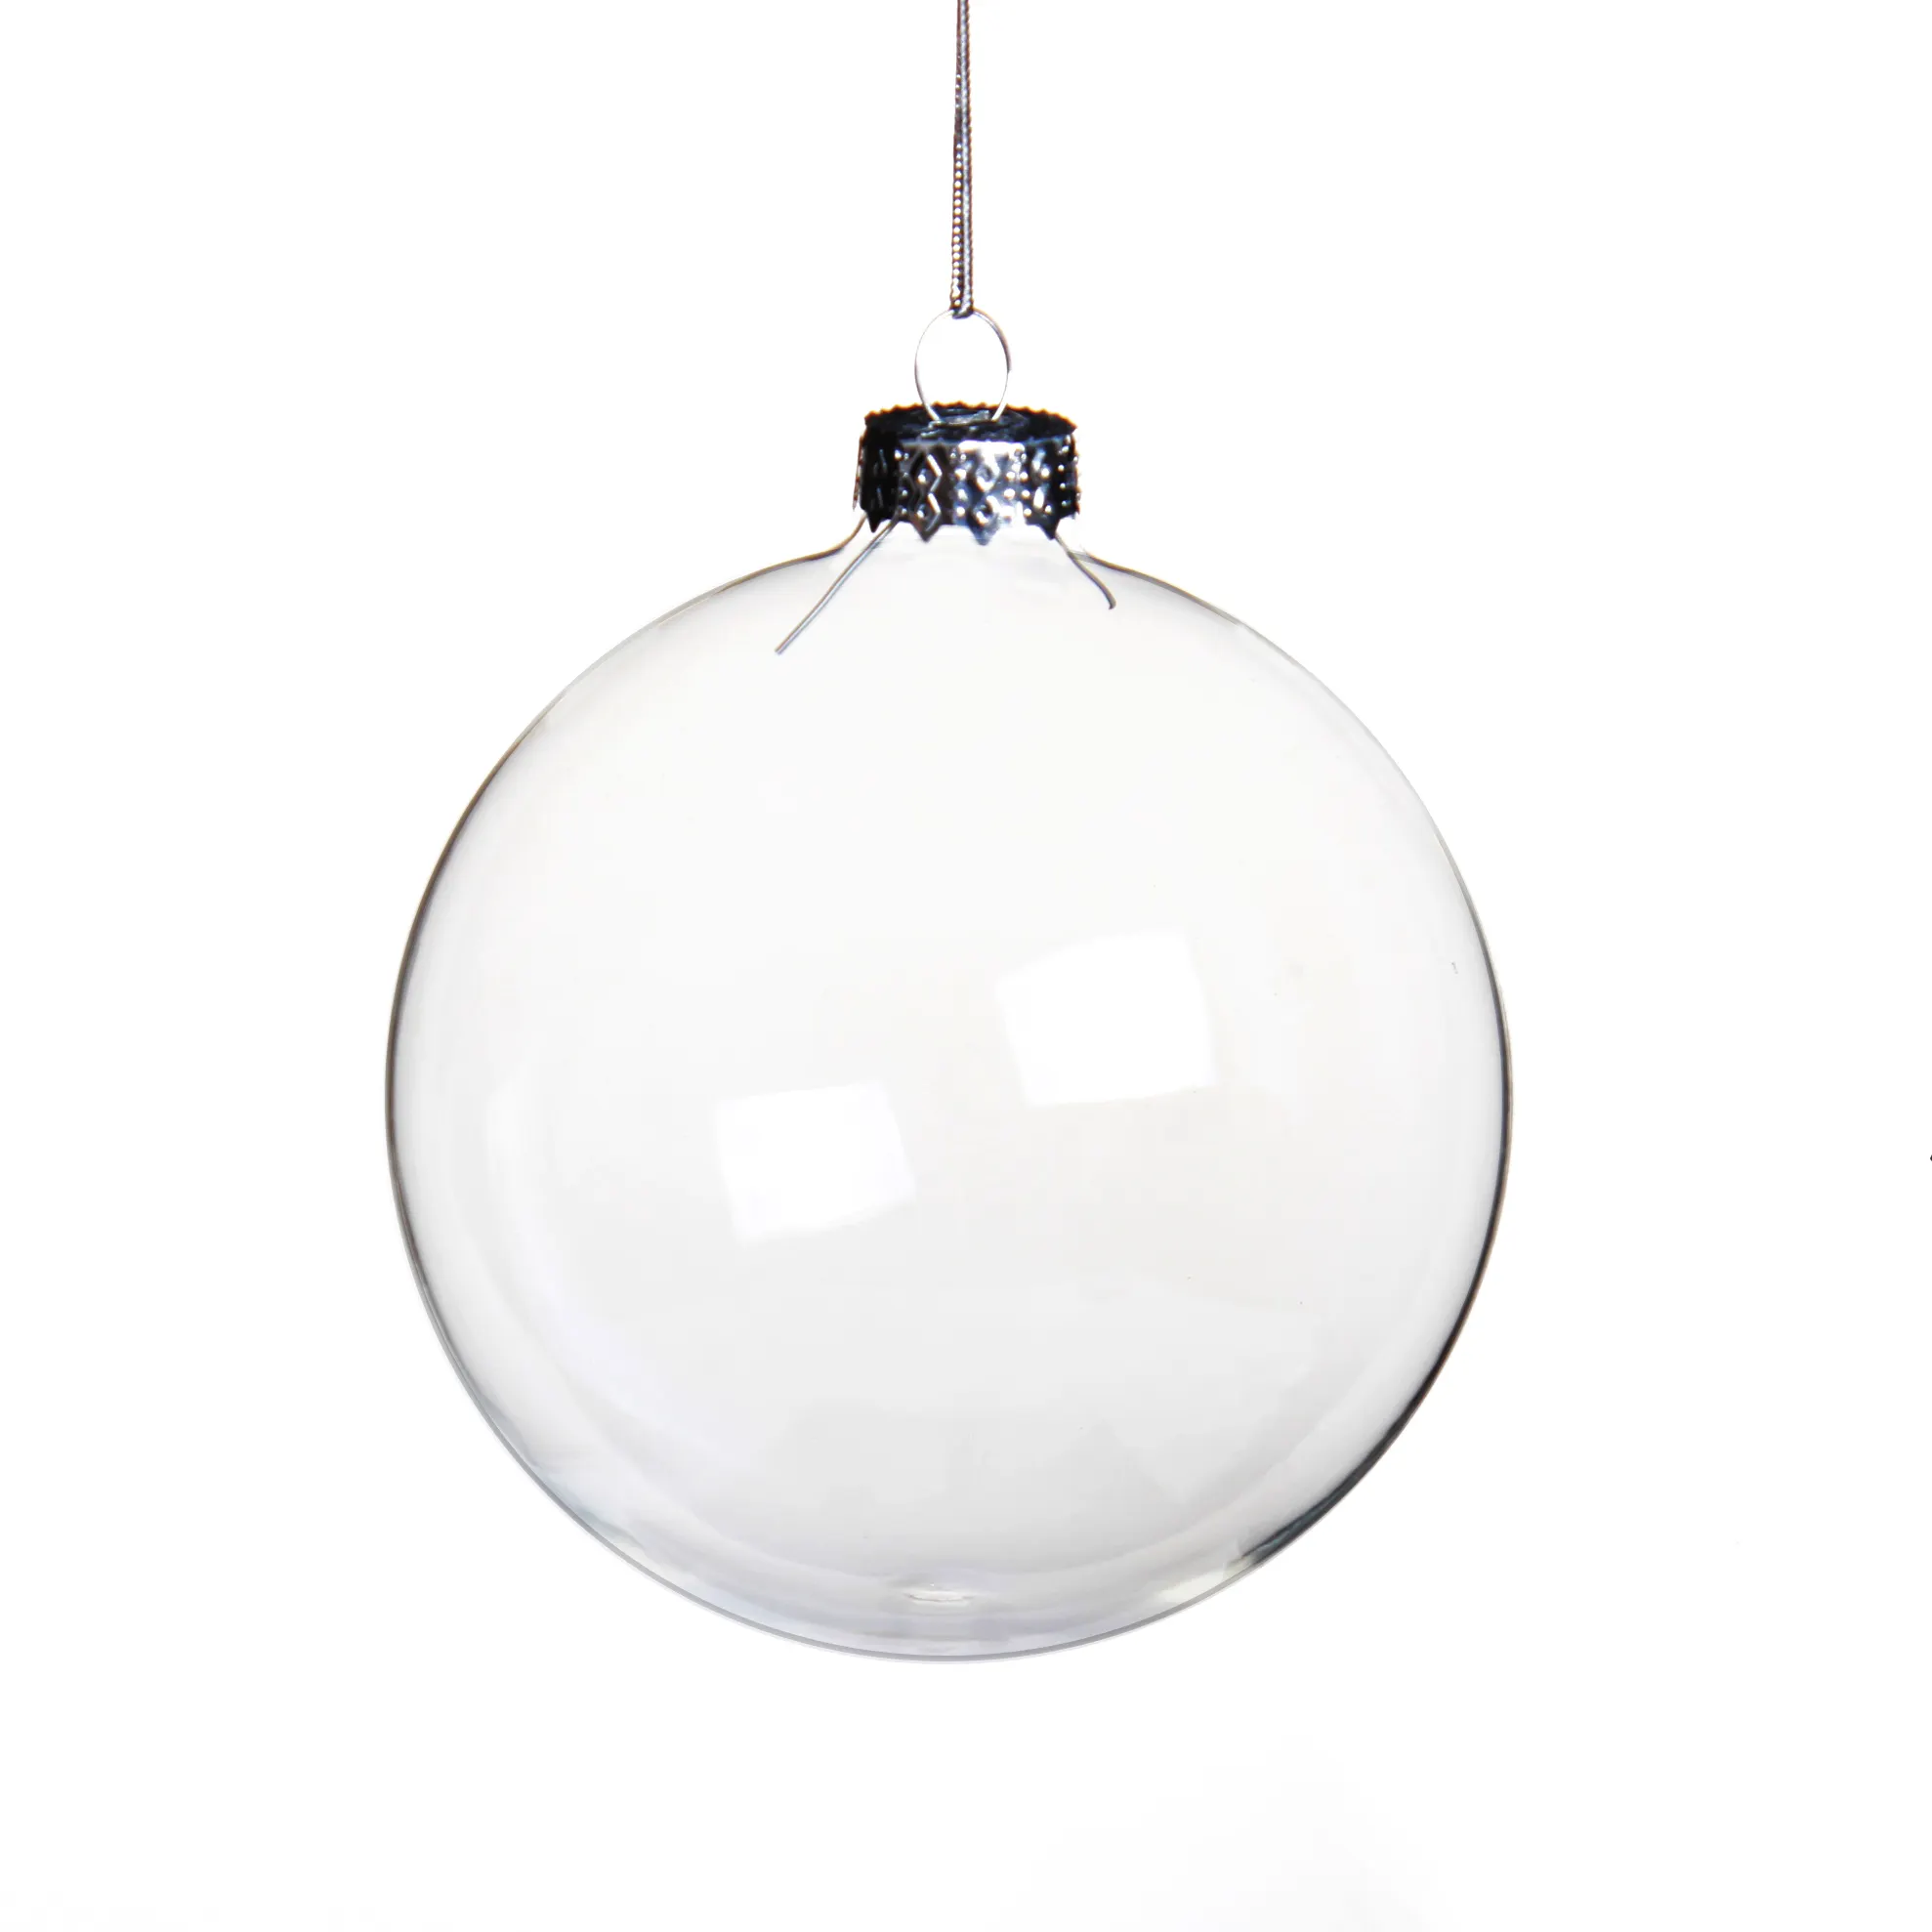 100 wholesale clear glass christmas ball ornaments